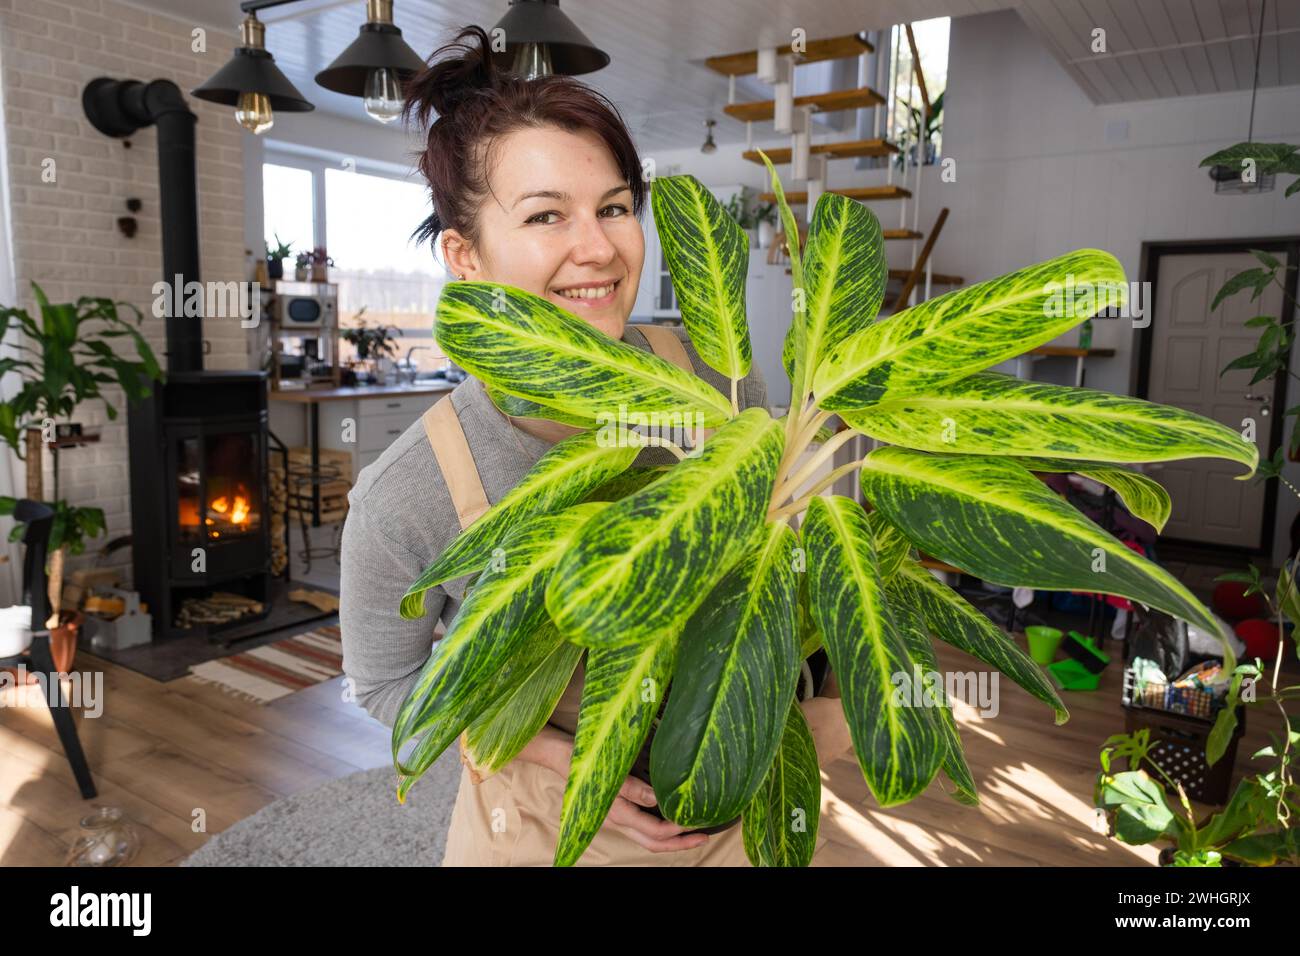 A happy woman in a green house with a potted plant in her hands smiles, takes care of a flower. The interior of a cozy eco-frien Stock Photo